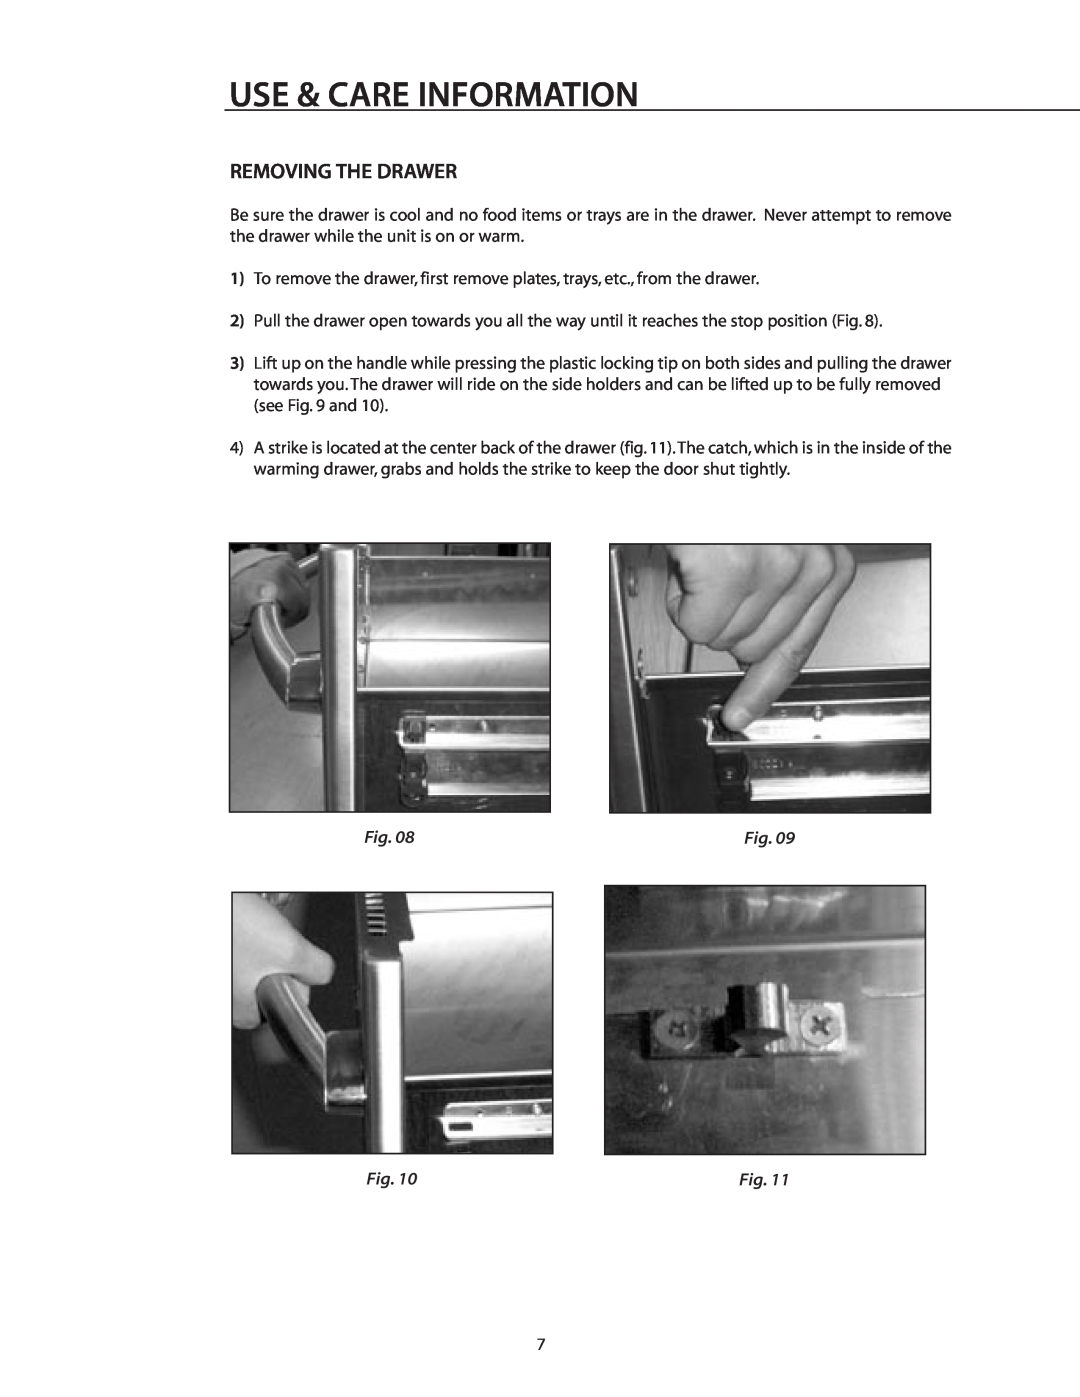 DCS WDS-30, WDI, WDS-27 manual Removing The Drawer, Use & Care Information 